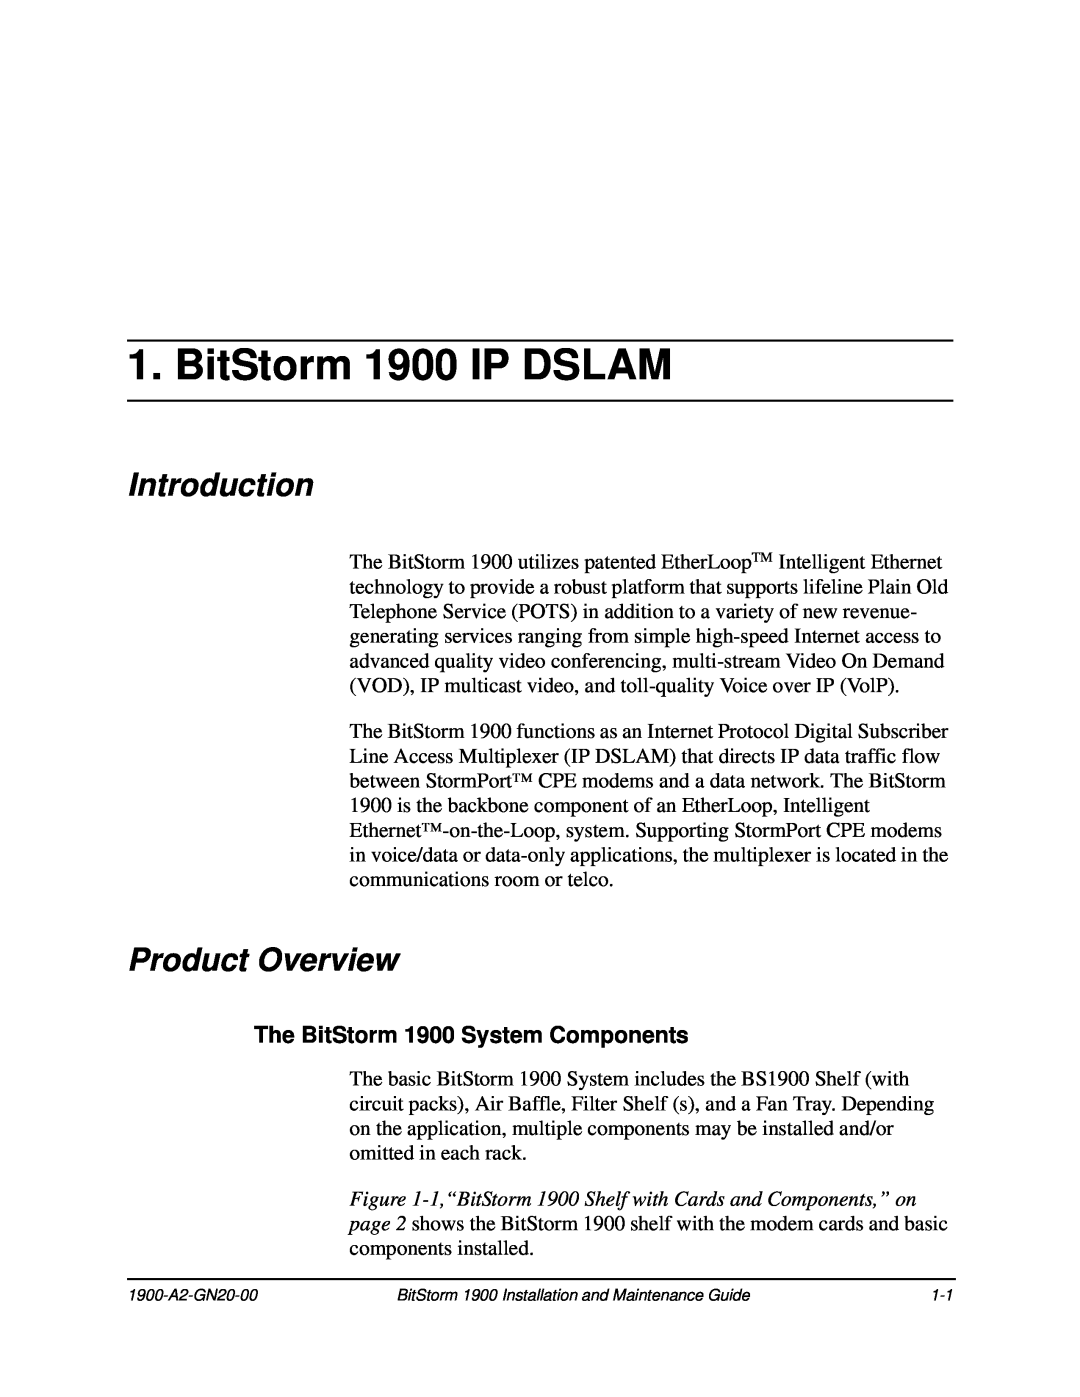 Paradyne manual BitStorm 1900 IP DSLAM, Introduction, Product Overview, The BitStorm 1900 System Components 